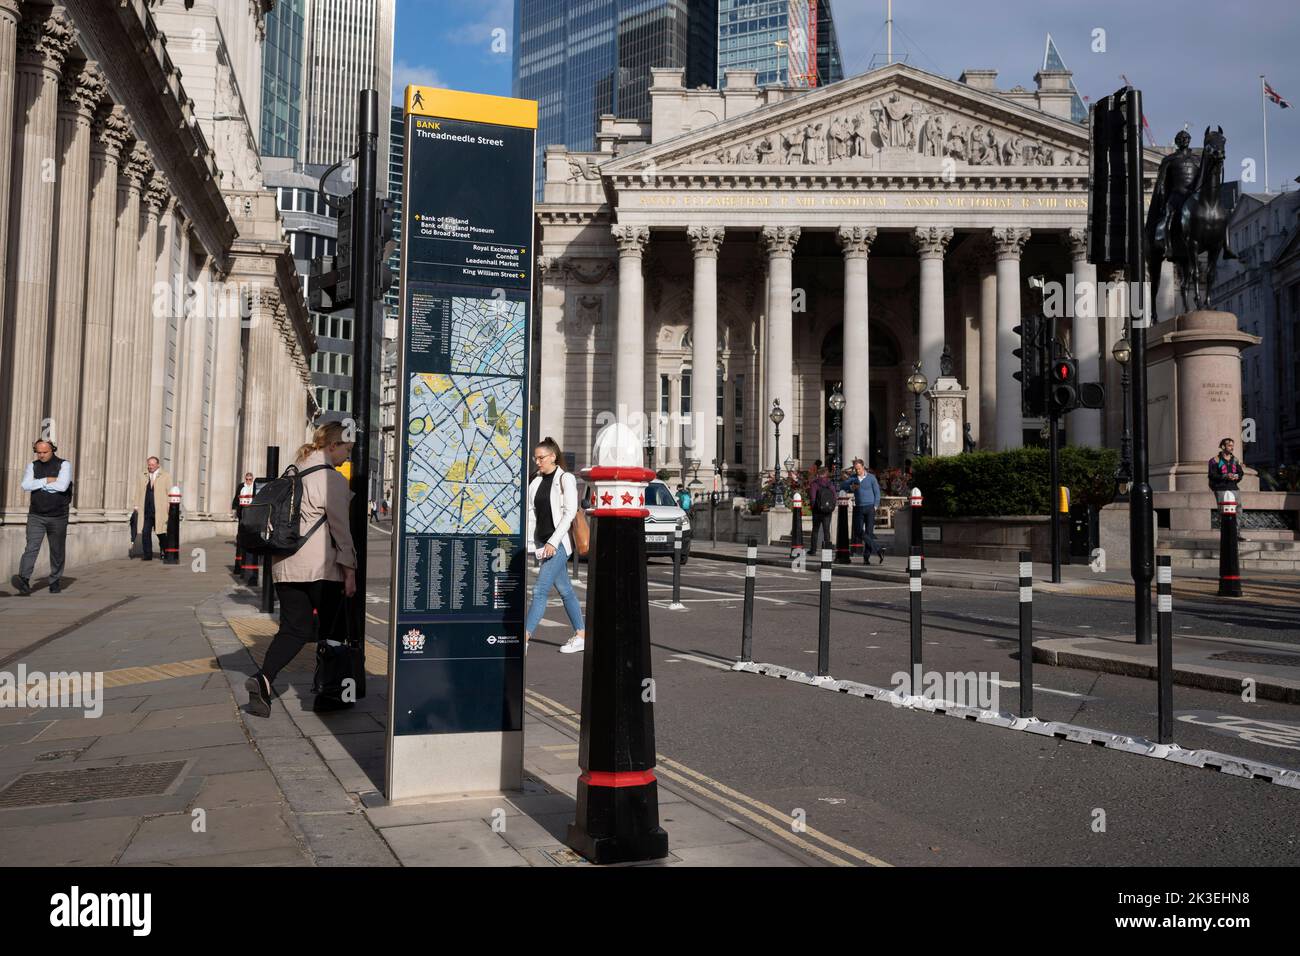 An exterior of the Bank of England (left) and Royal Exchange (right) in the aftermath of new Prime Minster, Liz Truss and her Chancellor Kwasi Kwarteng's mini-budget last Friday, the British Pound continues to fall on worldwide currency markets, now at its lowest rate since the UK went decimal in 1971, on 26th September 2022, in the City of London, England. The Bank of England has said today that it won't hesitate to raise interest rates in order to return inflation to its 2% target. Stock Photo